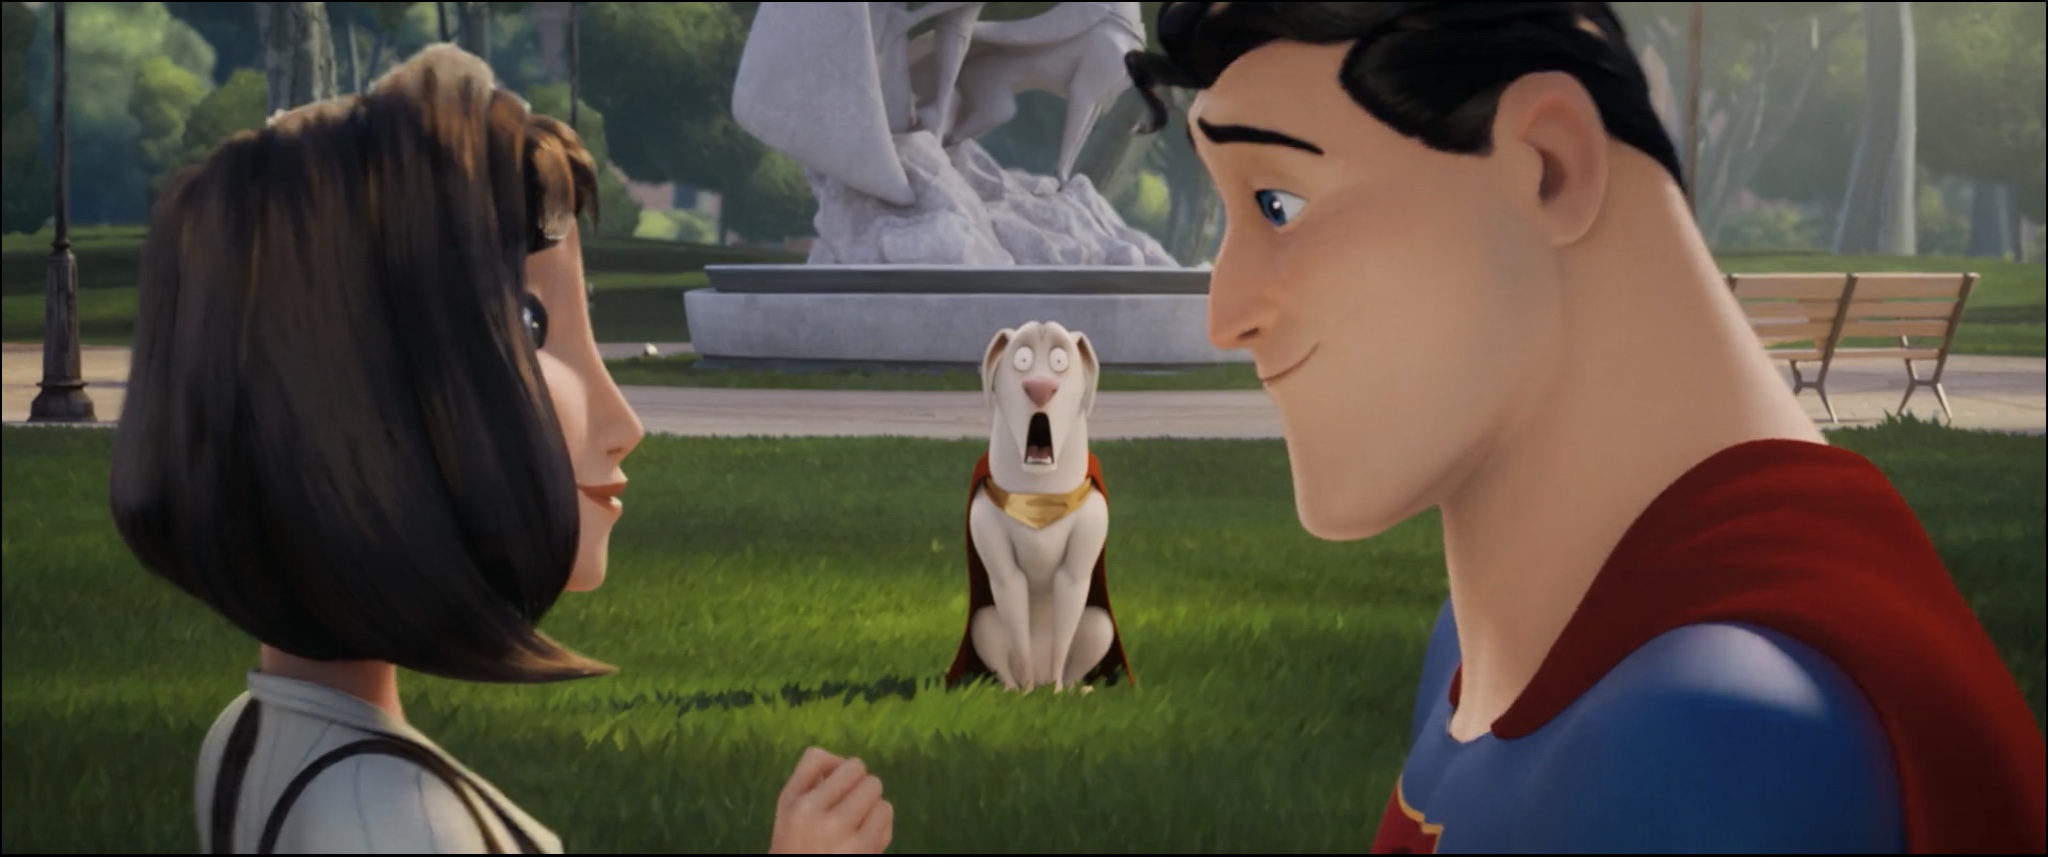 Krypto shocked about Superman and Lois Blank Meme Template